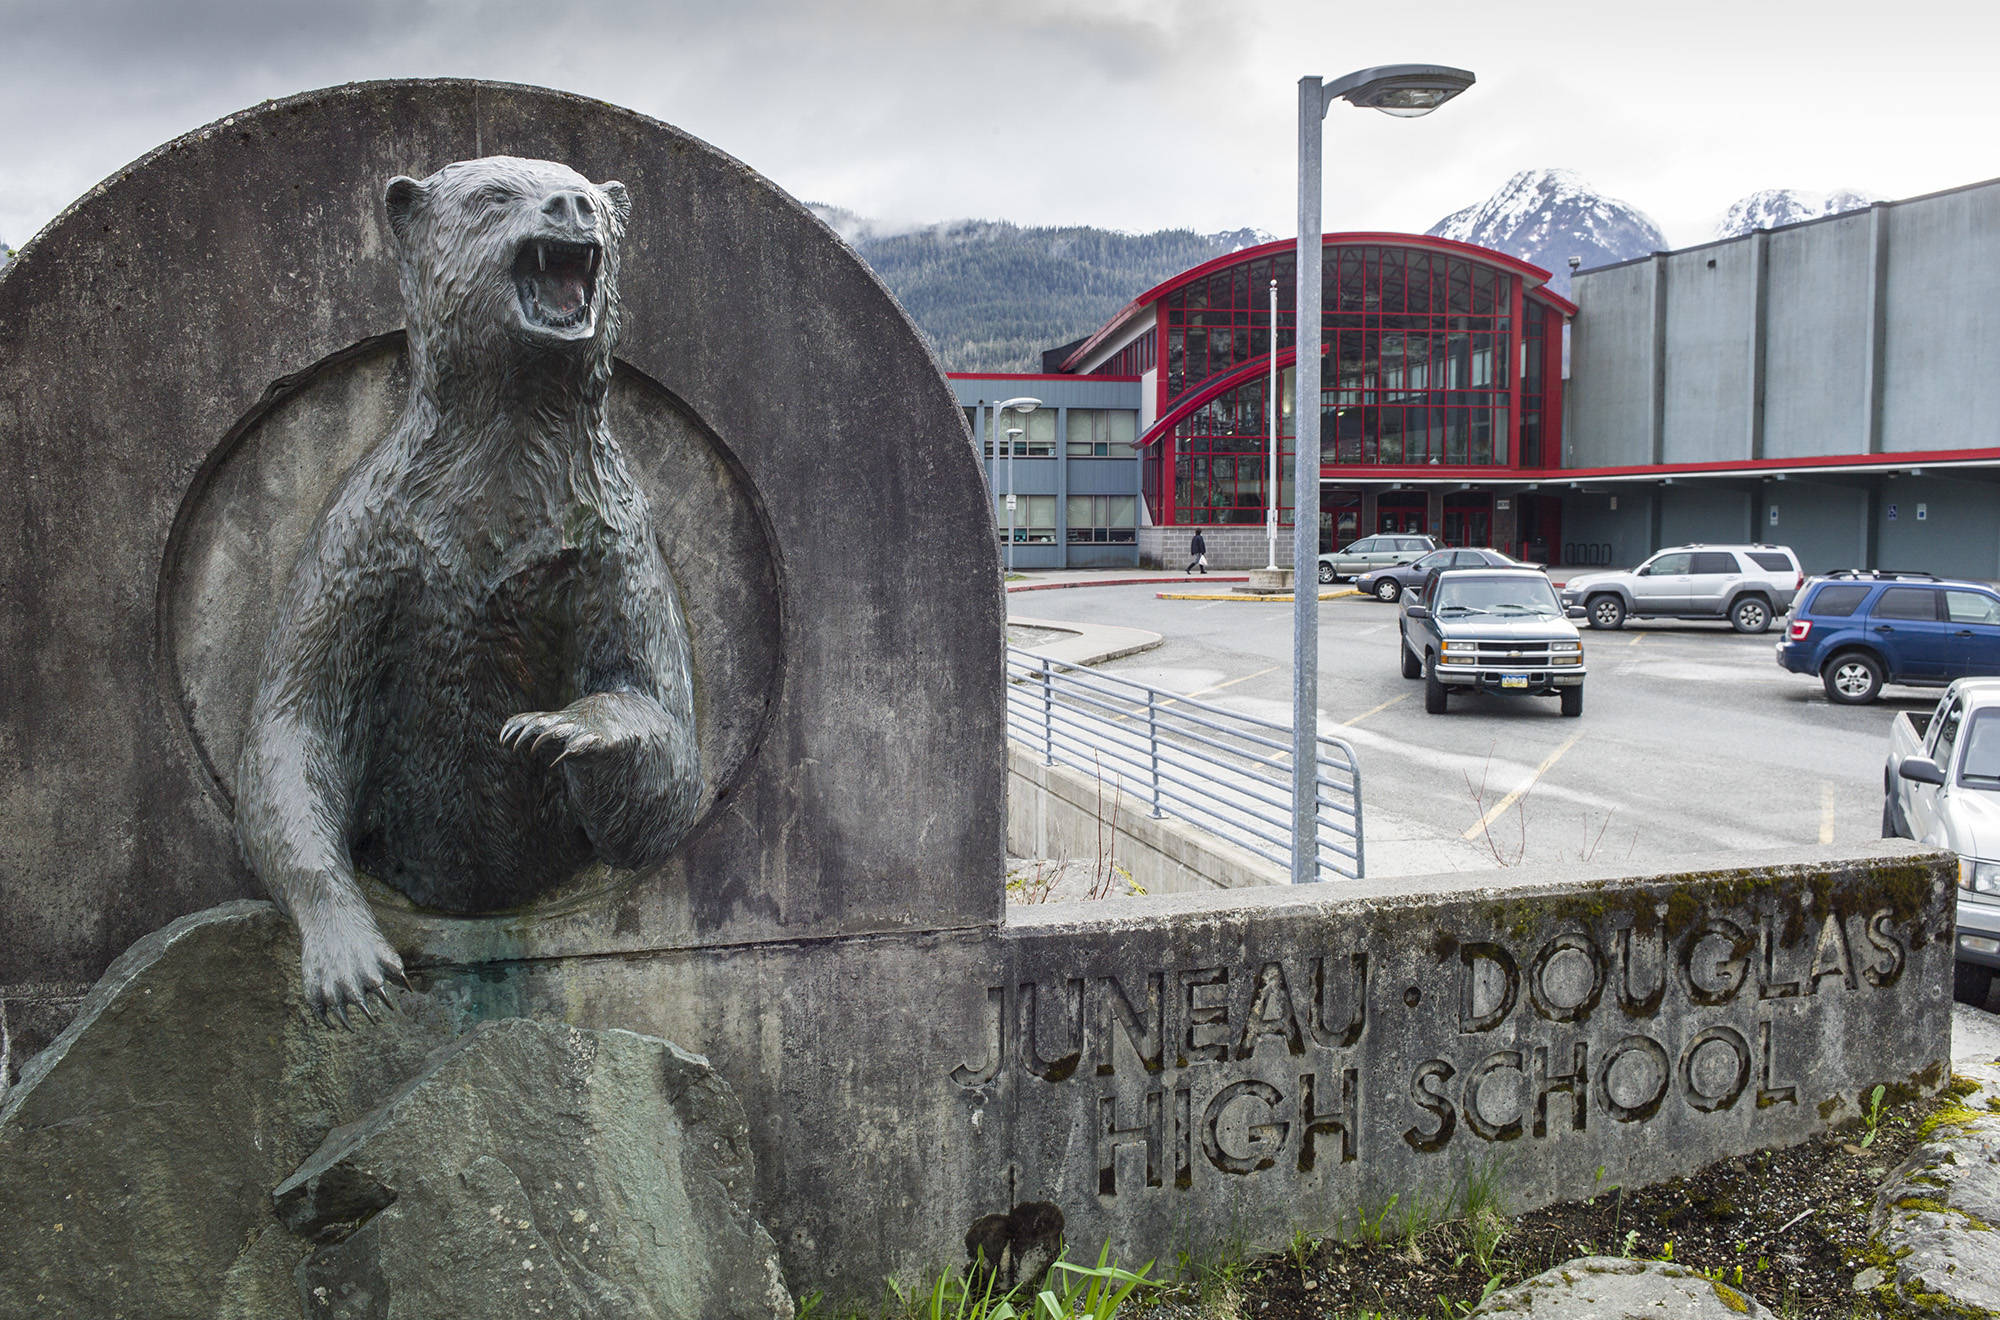 Juneau-Douglas High School is seen on April 27, 2015. If Juneau voters elect to extend the 1 percent sales tax increase, the Juneau School District will receive $5 million for maintenance costs over the ensuing five years. (Michael Penn | Juneau Empire File)